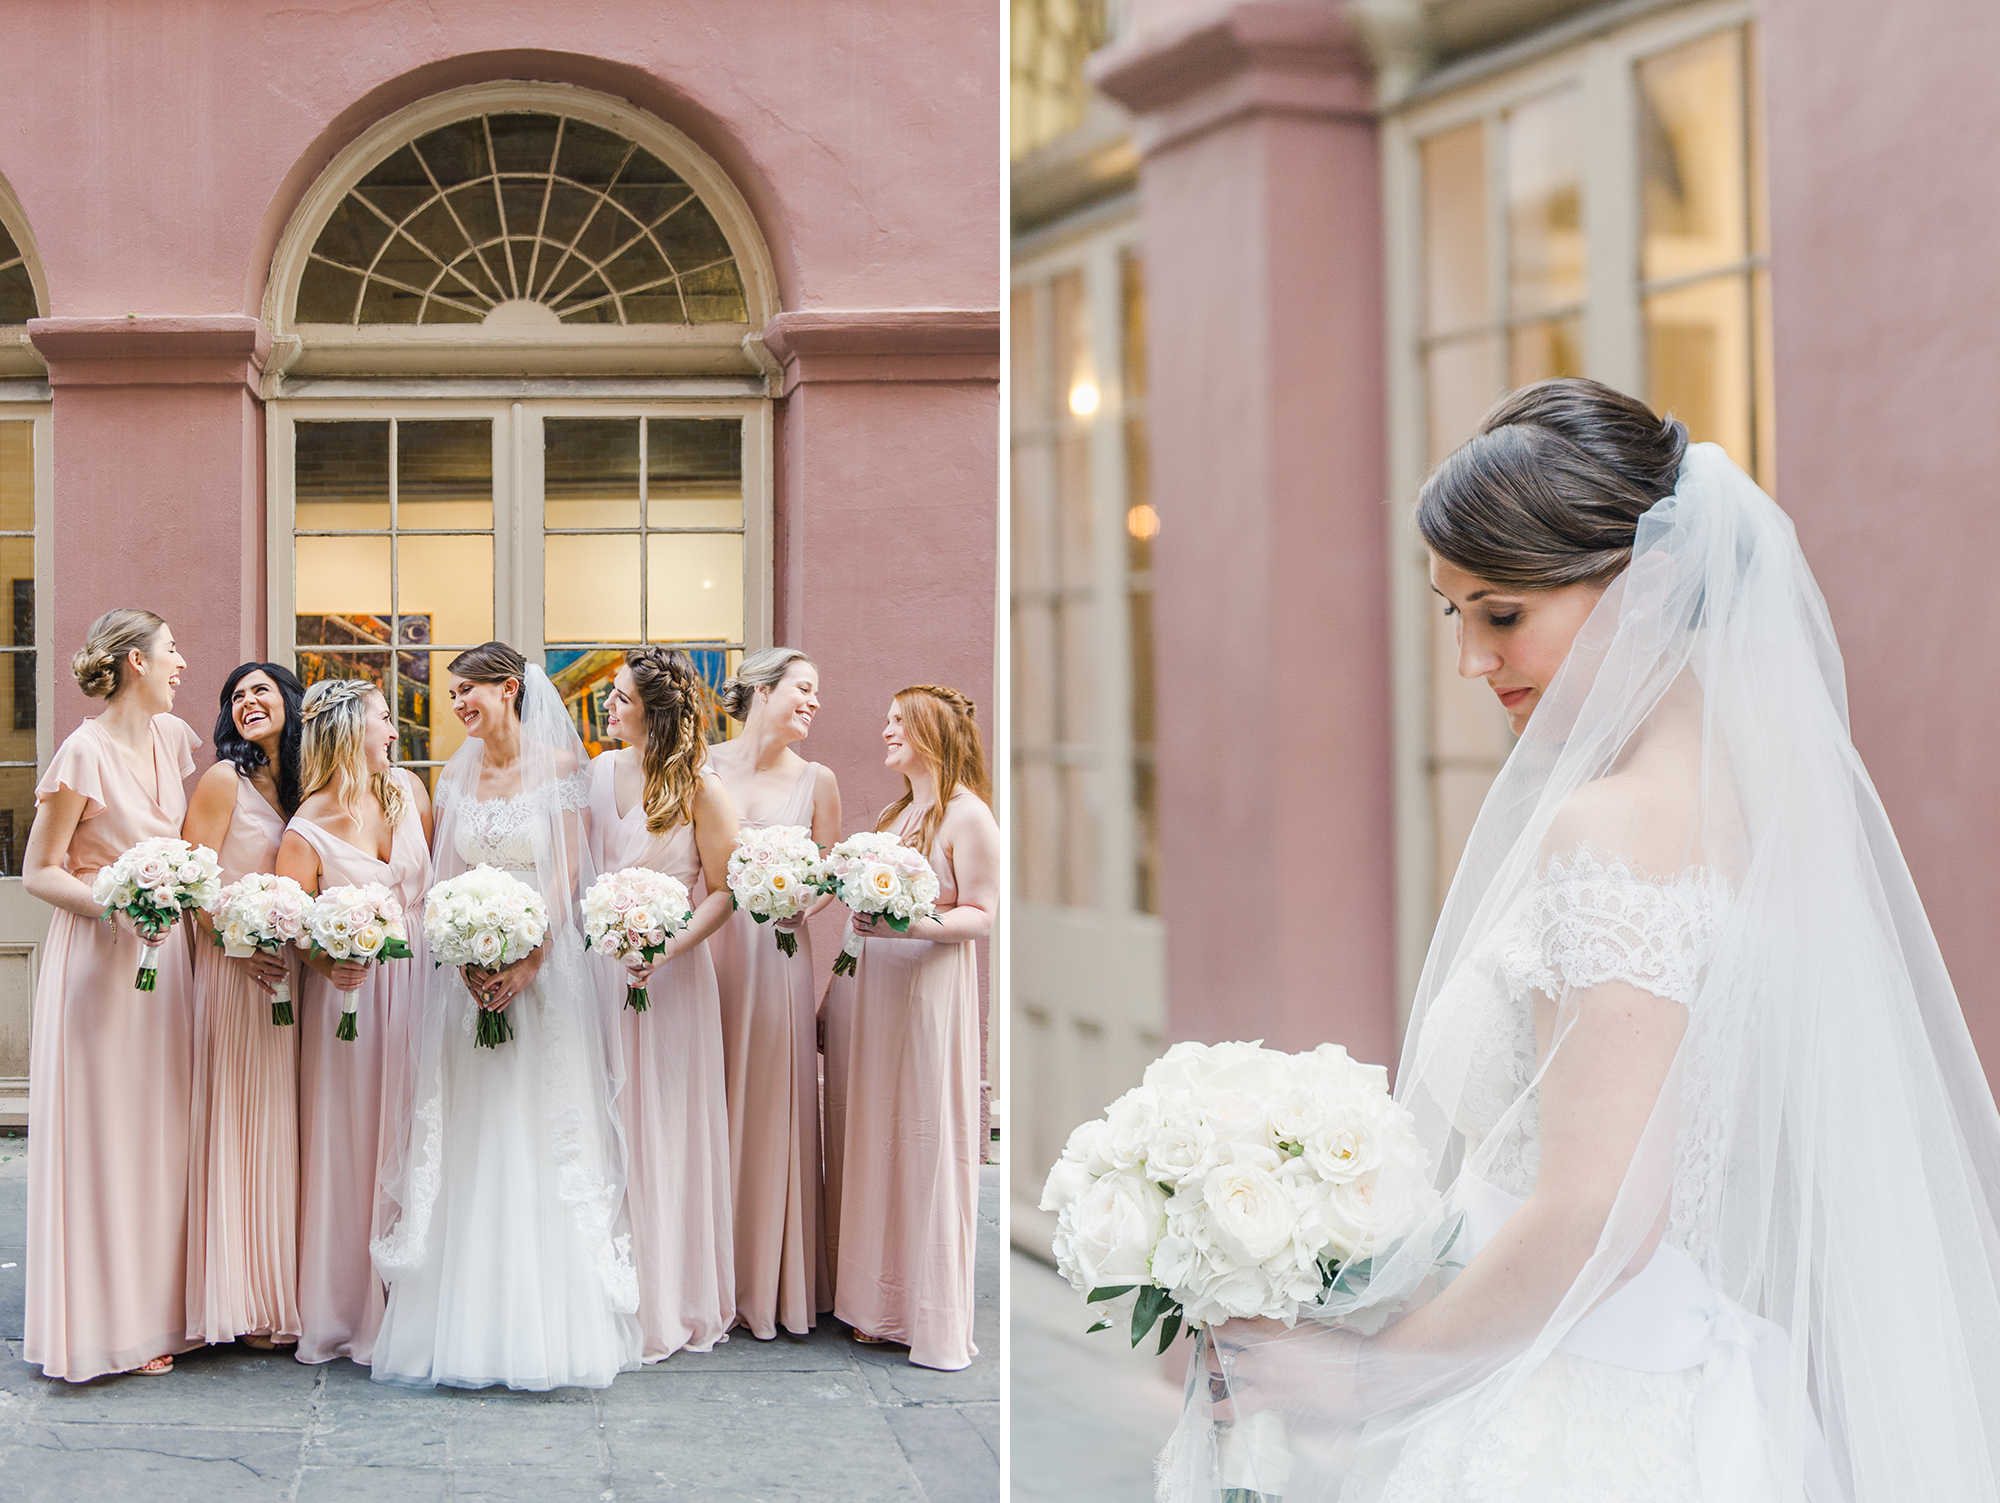 bride with bridesmaids and bouquets